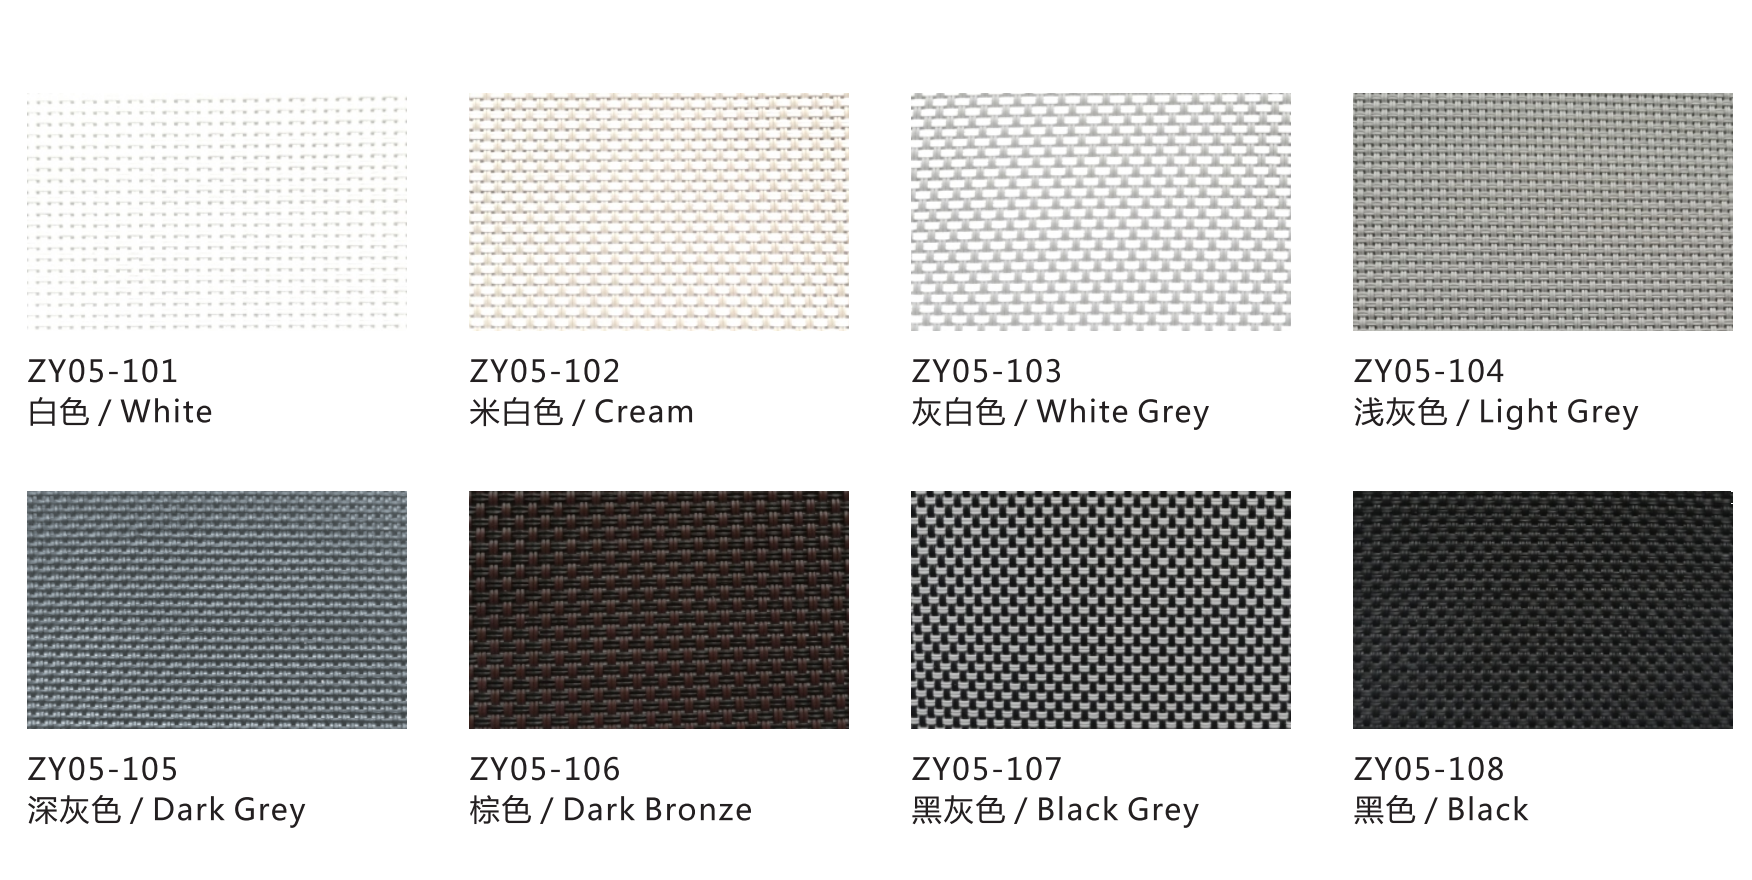 95% Blockout Outdoor Roller Blinds Fabric Colors